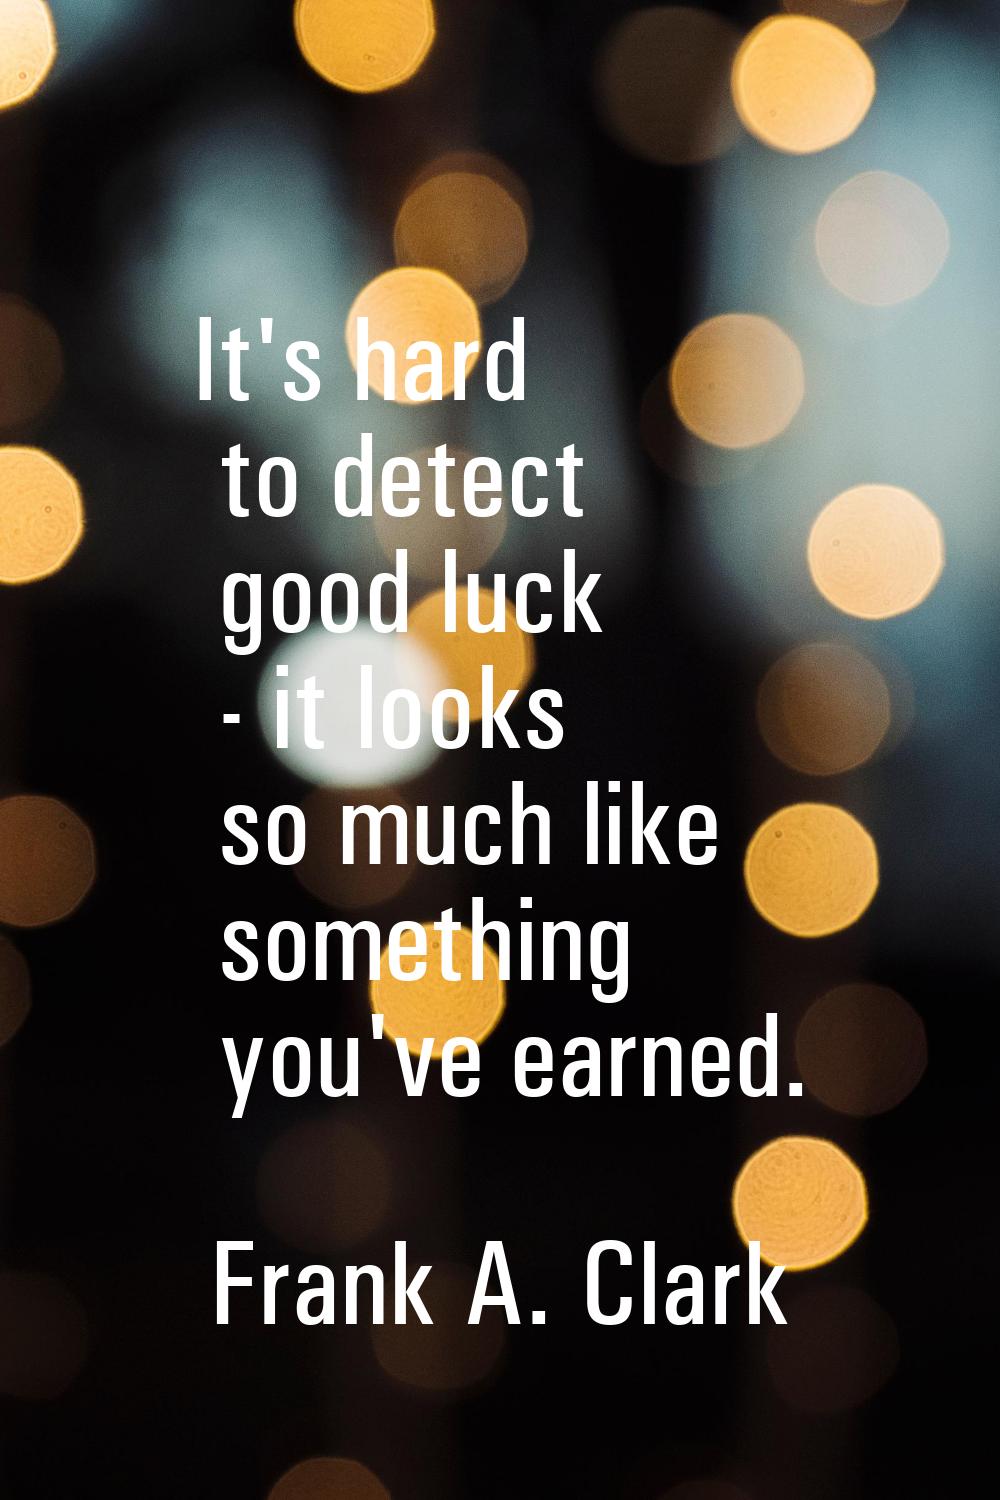 It's hard to detect good luck - it looks so much like something you've earned.